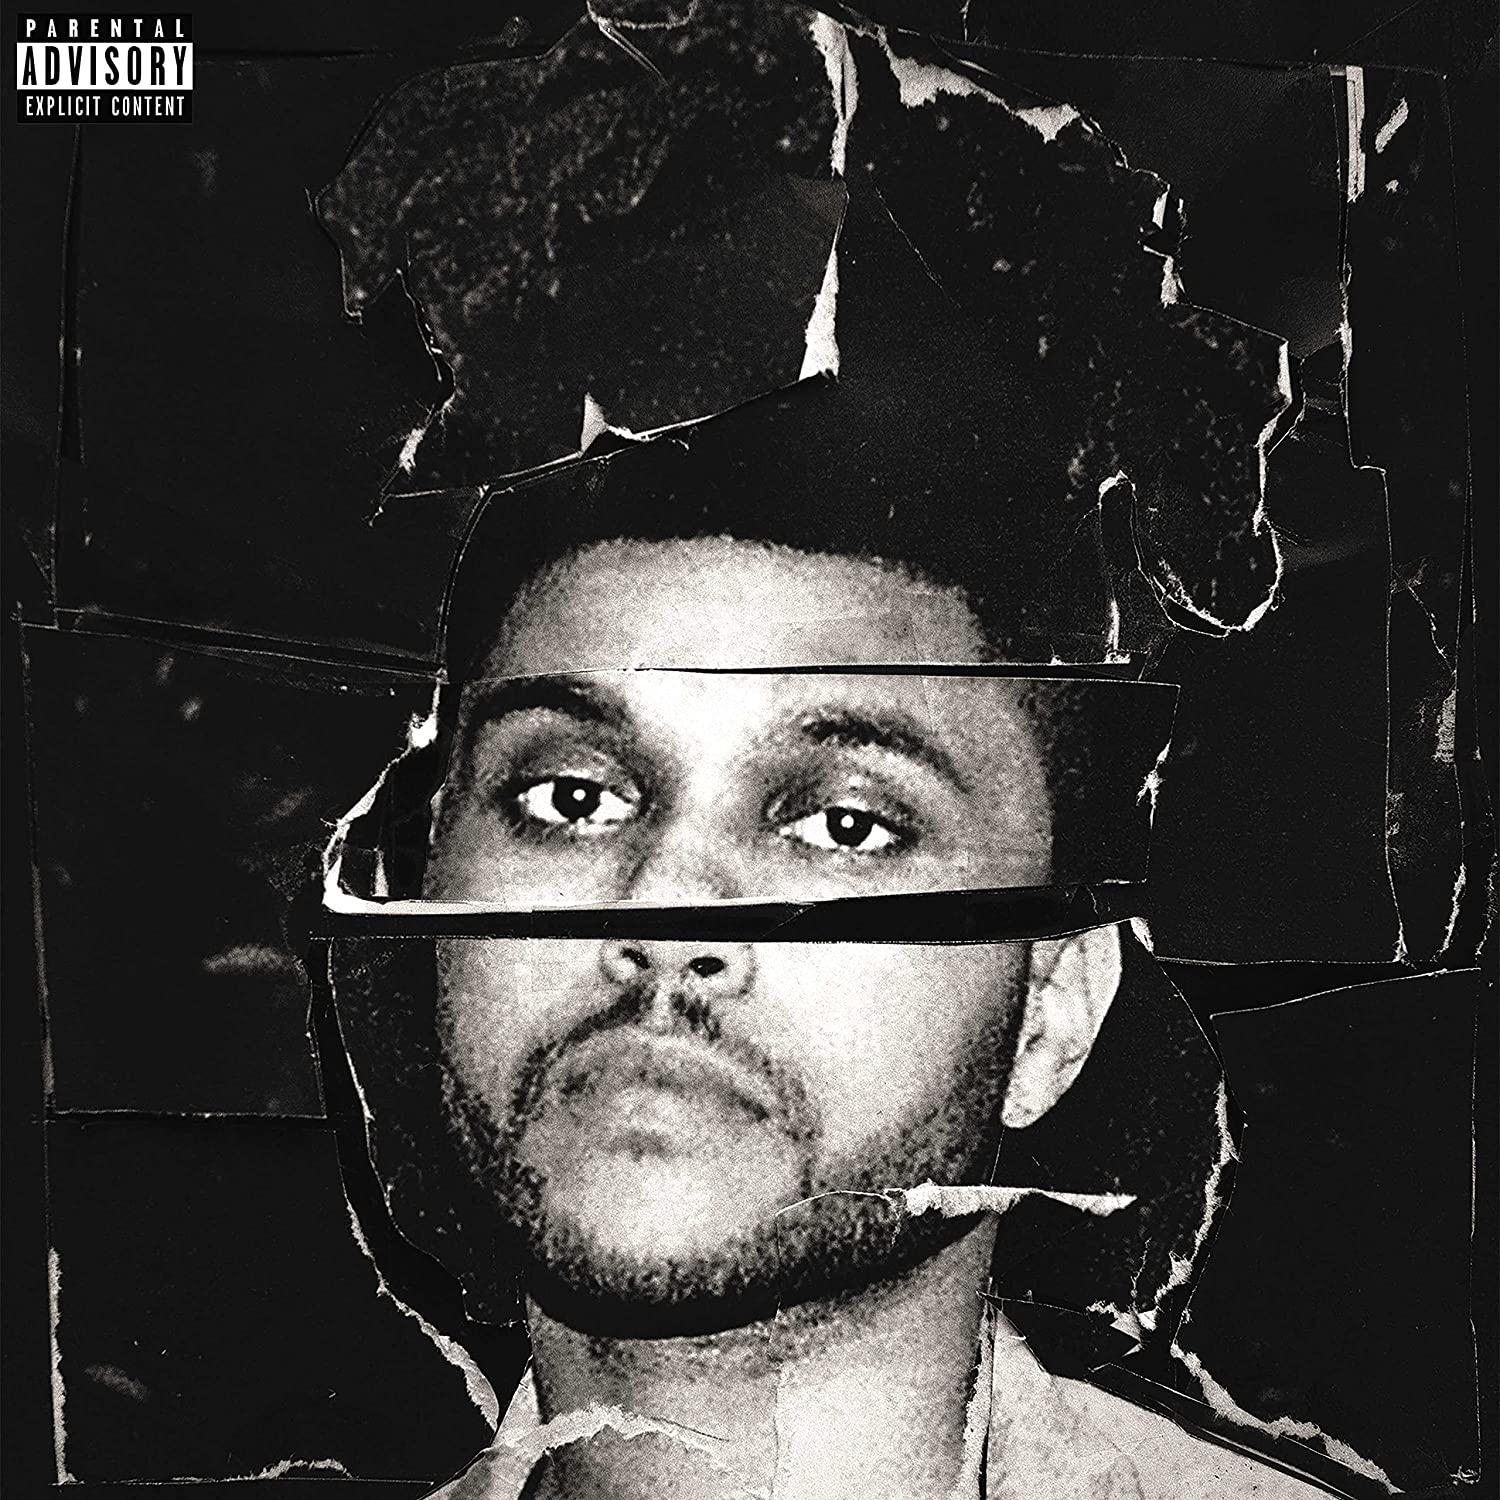 THE WEEKND - BEAUTY BEHIND THE MADNESS Vinyl 2xLP